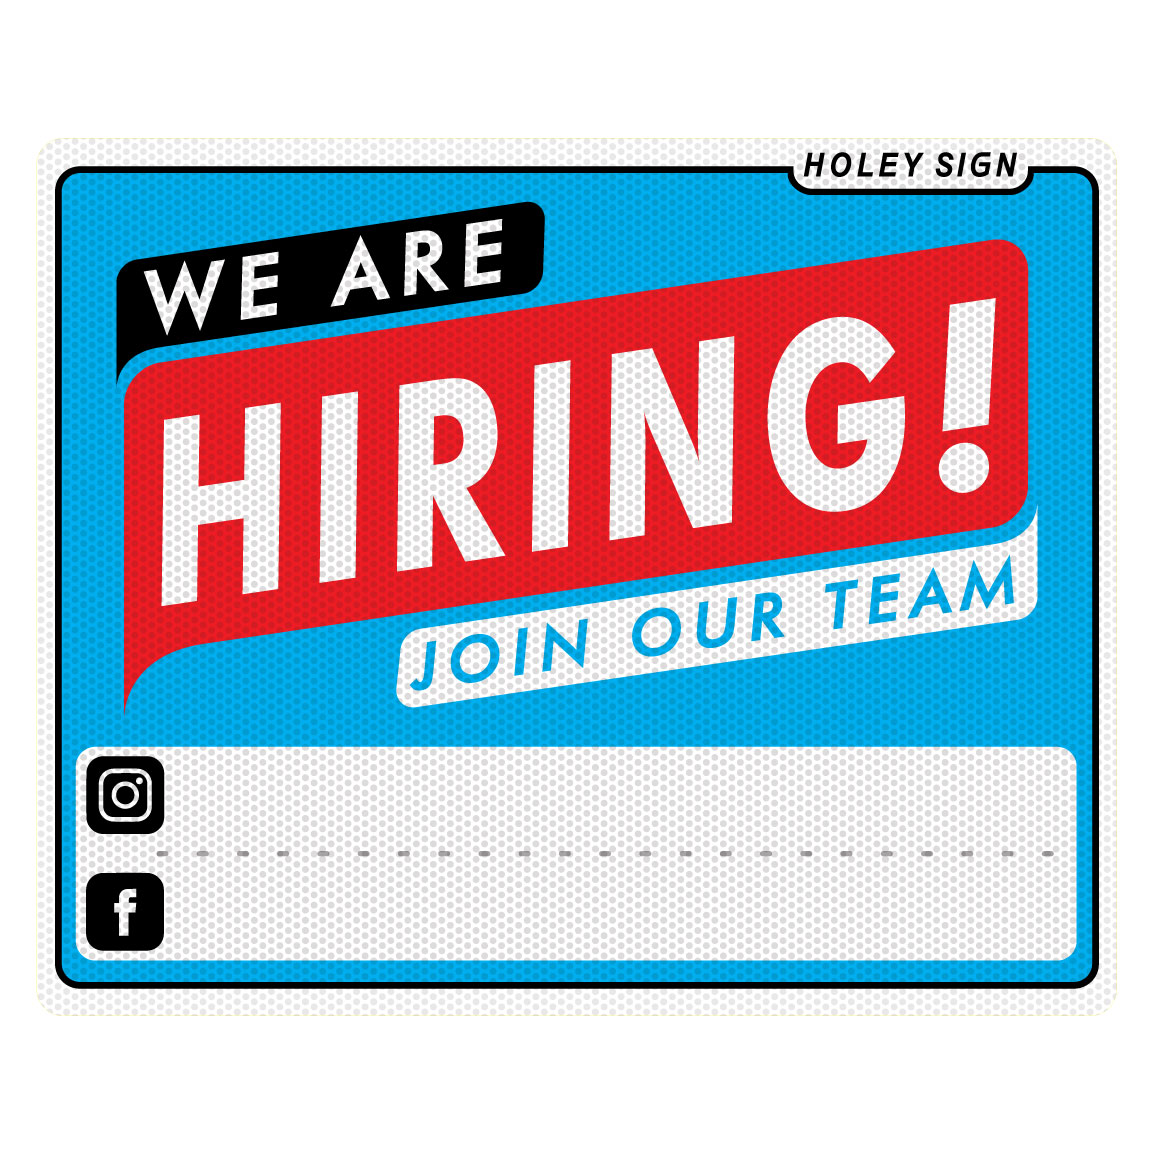 We Are Hiring - IG FB - Blue